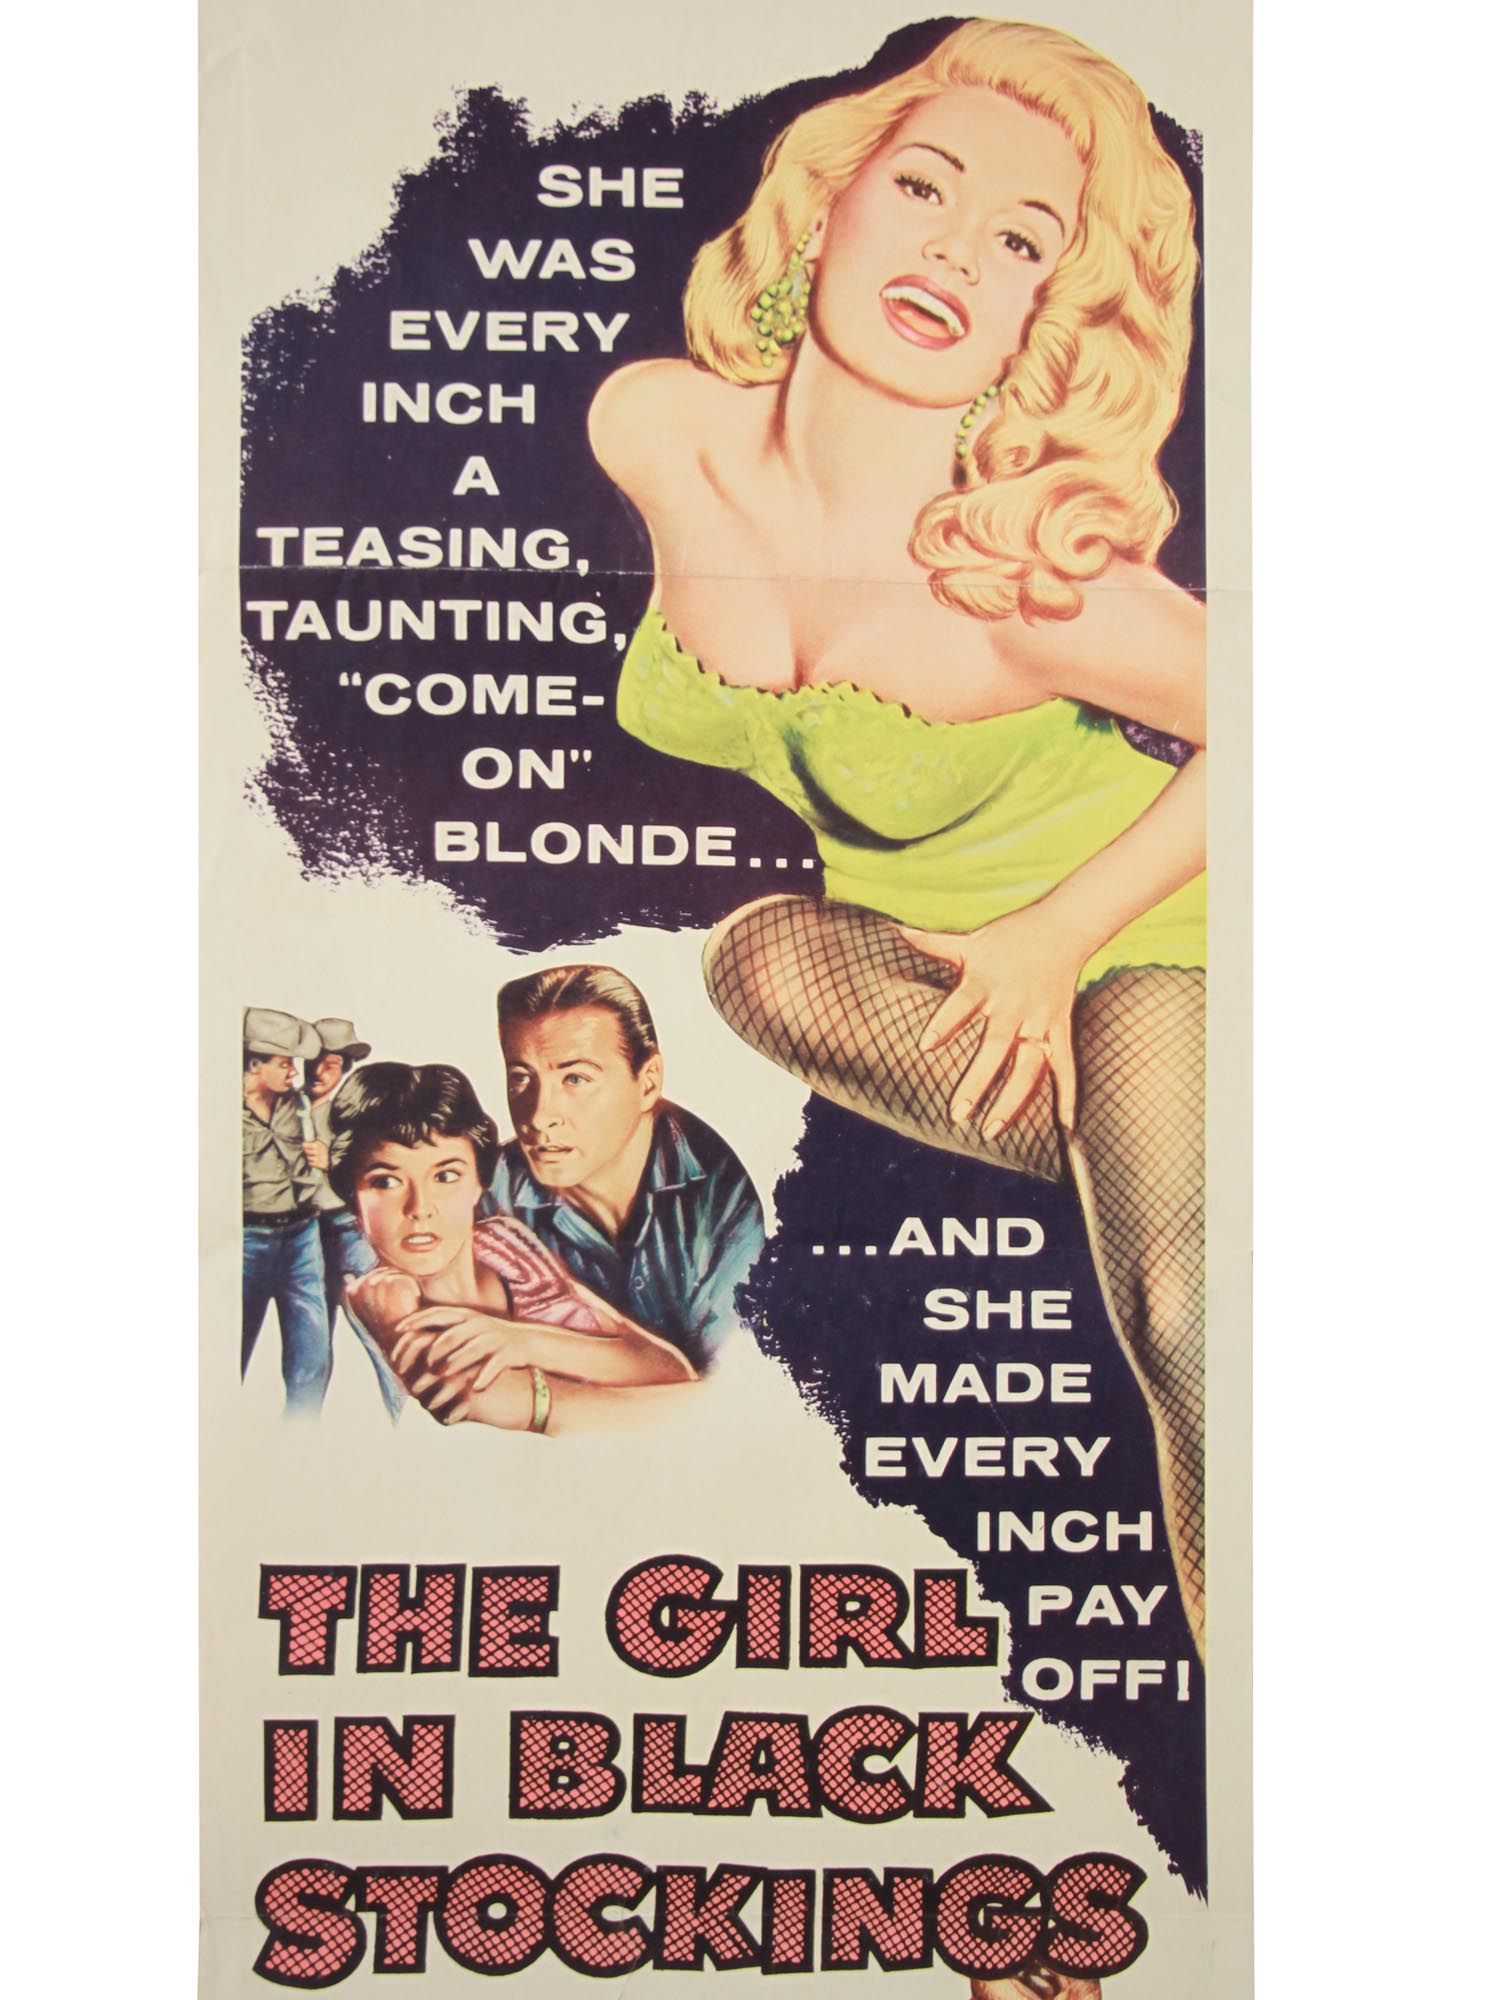 VINTAGE THE GIRL IN BLACK STOCKINGS MOVIE POSTER PIC-1